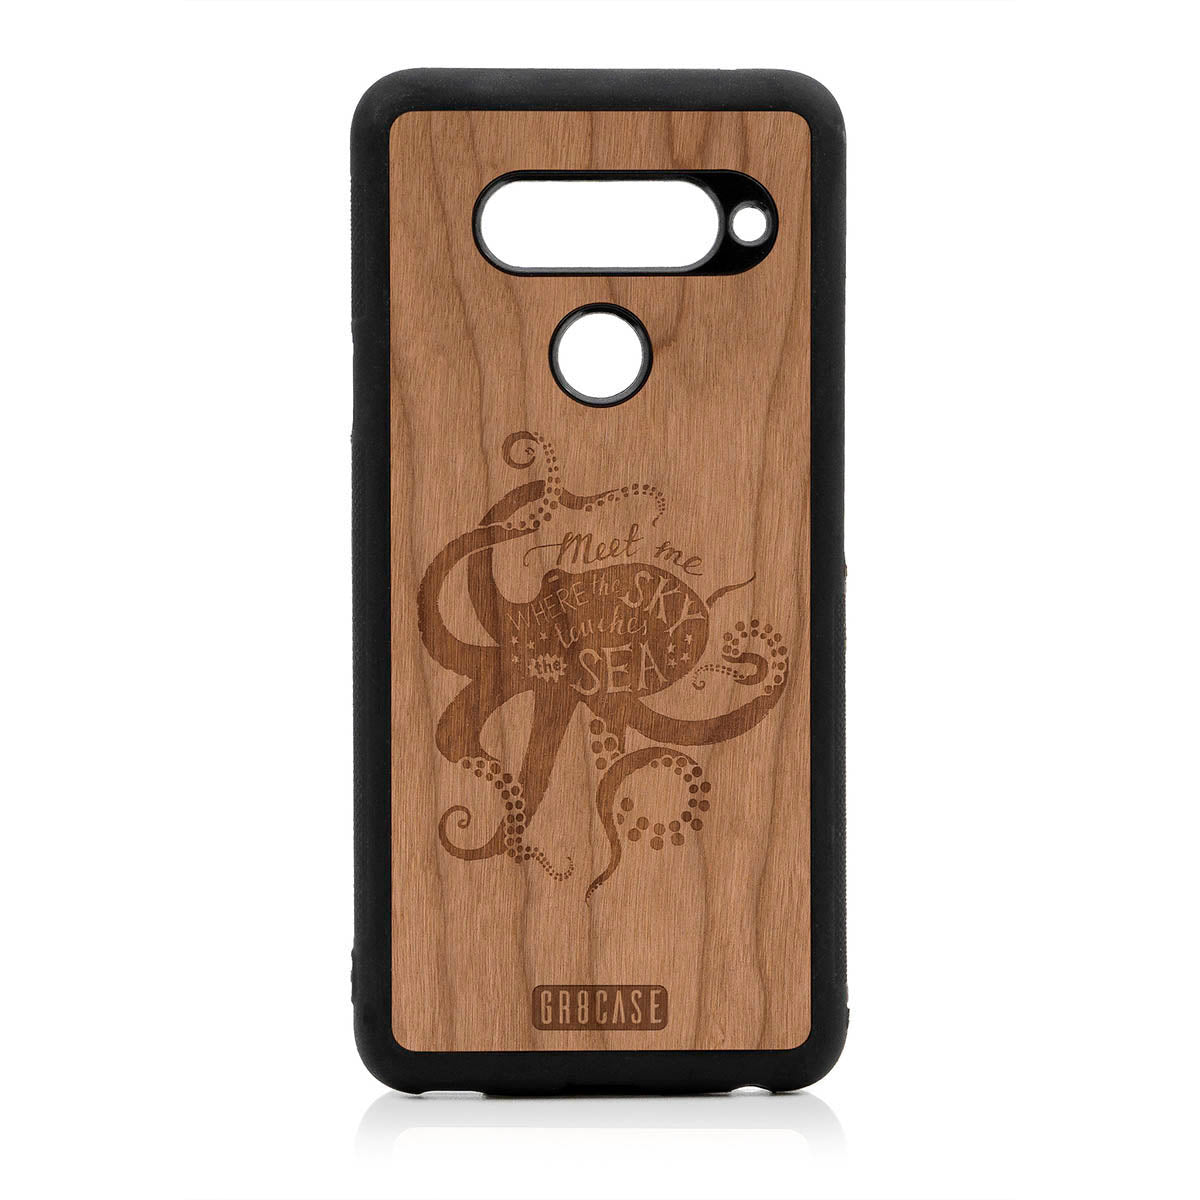 Meet Me Where The Sky Touches The Sea (Octopus) Design Wood Case For LG V40